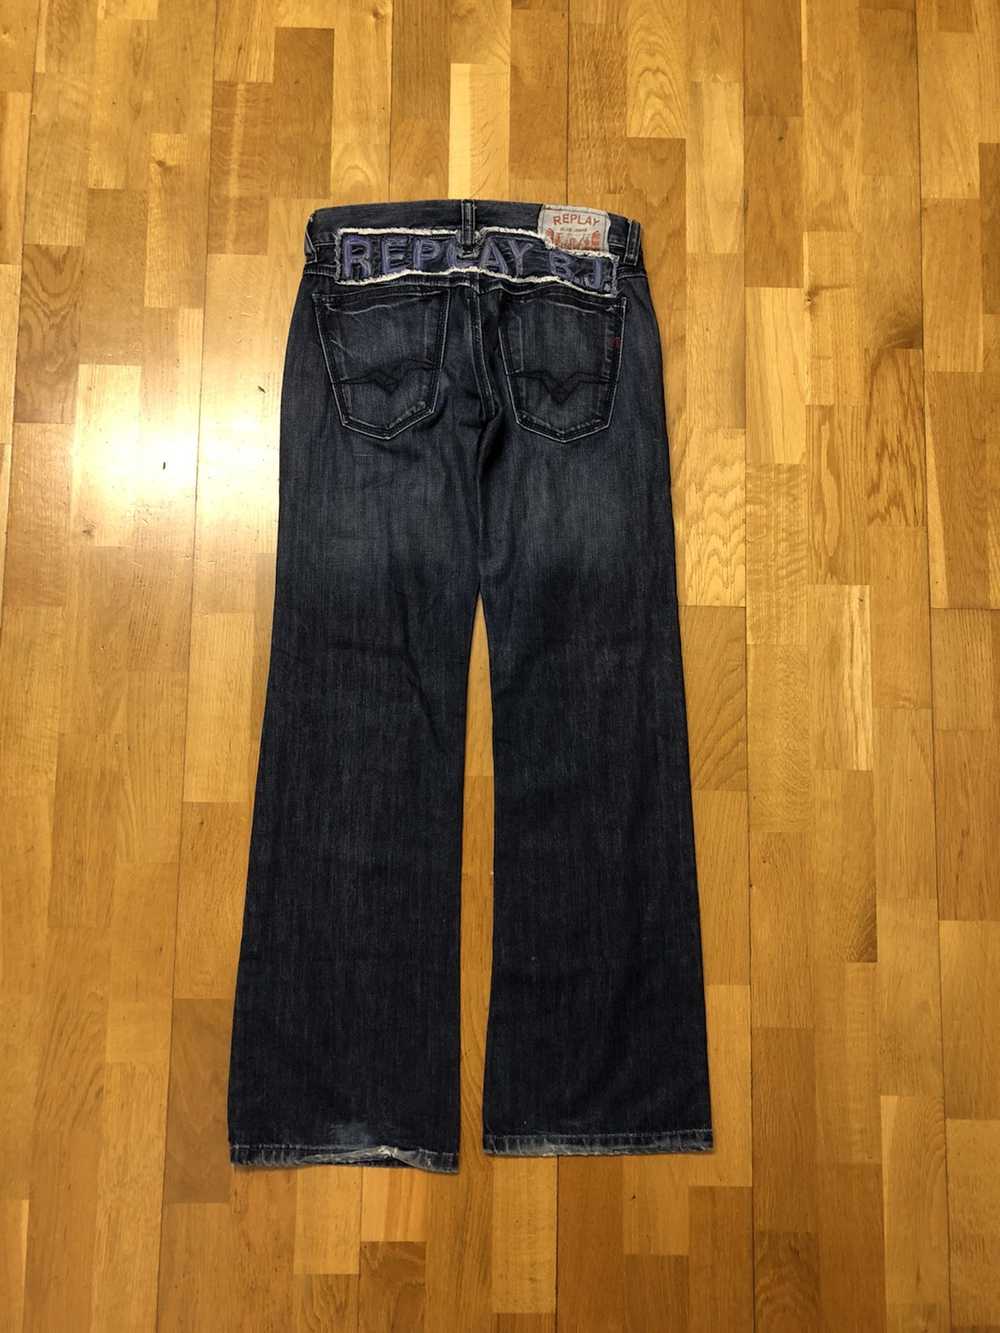 Replay × Vintage REPLAY BLUE JEANS ITALY RARE VIN… - image 2